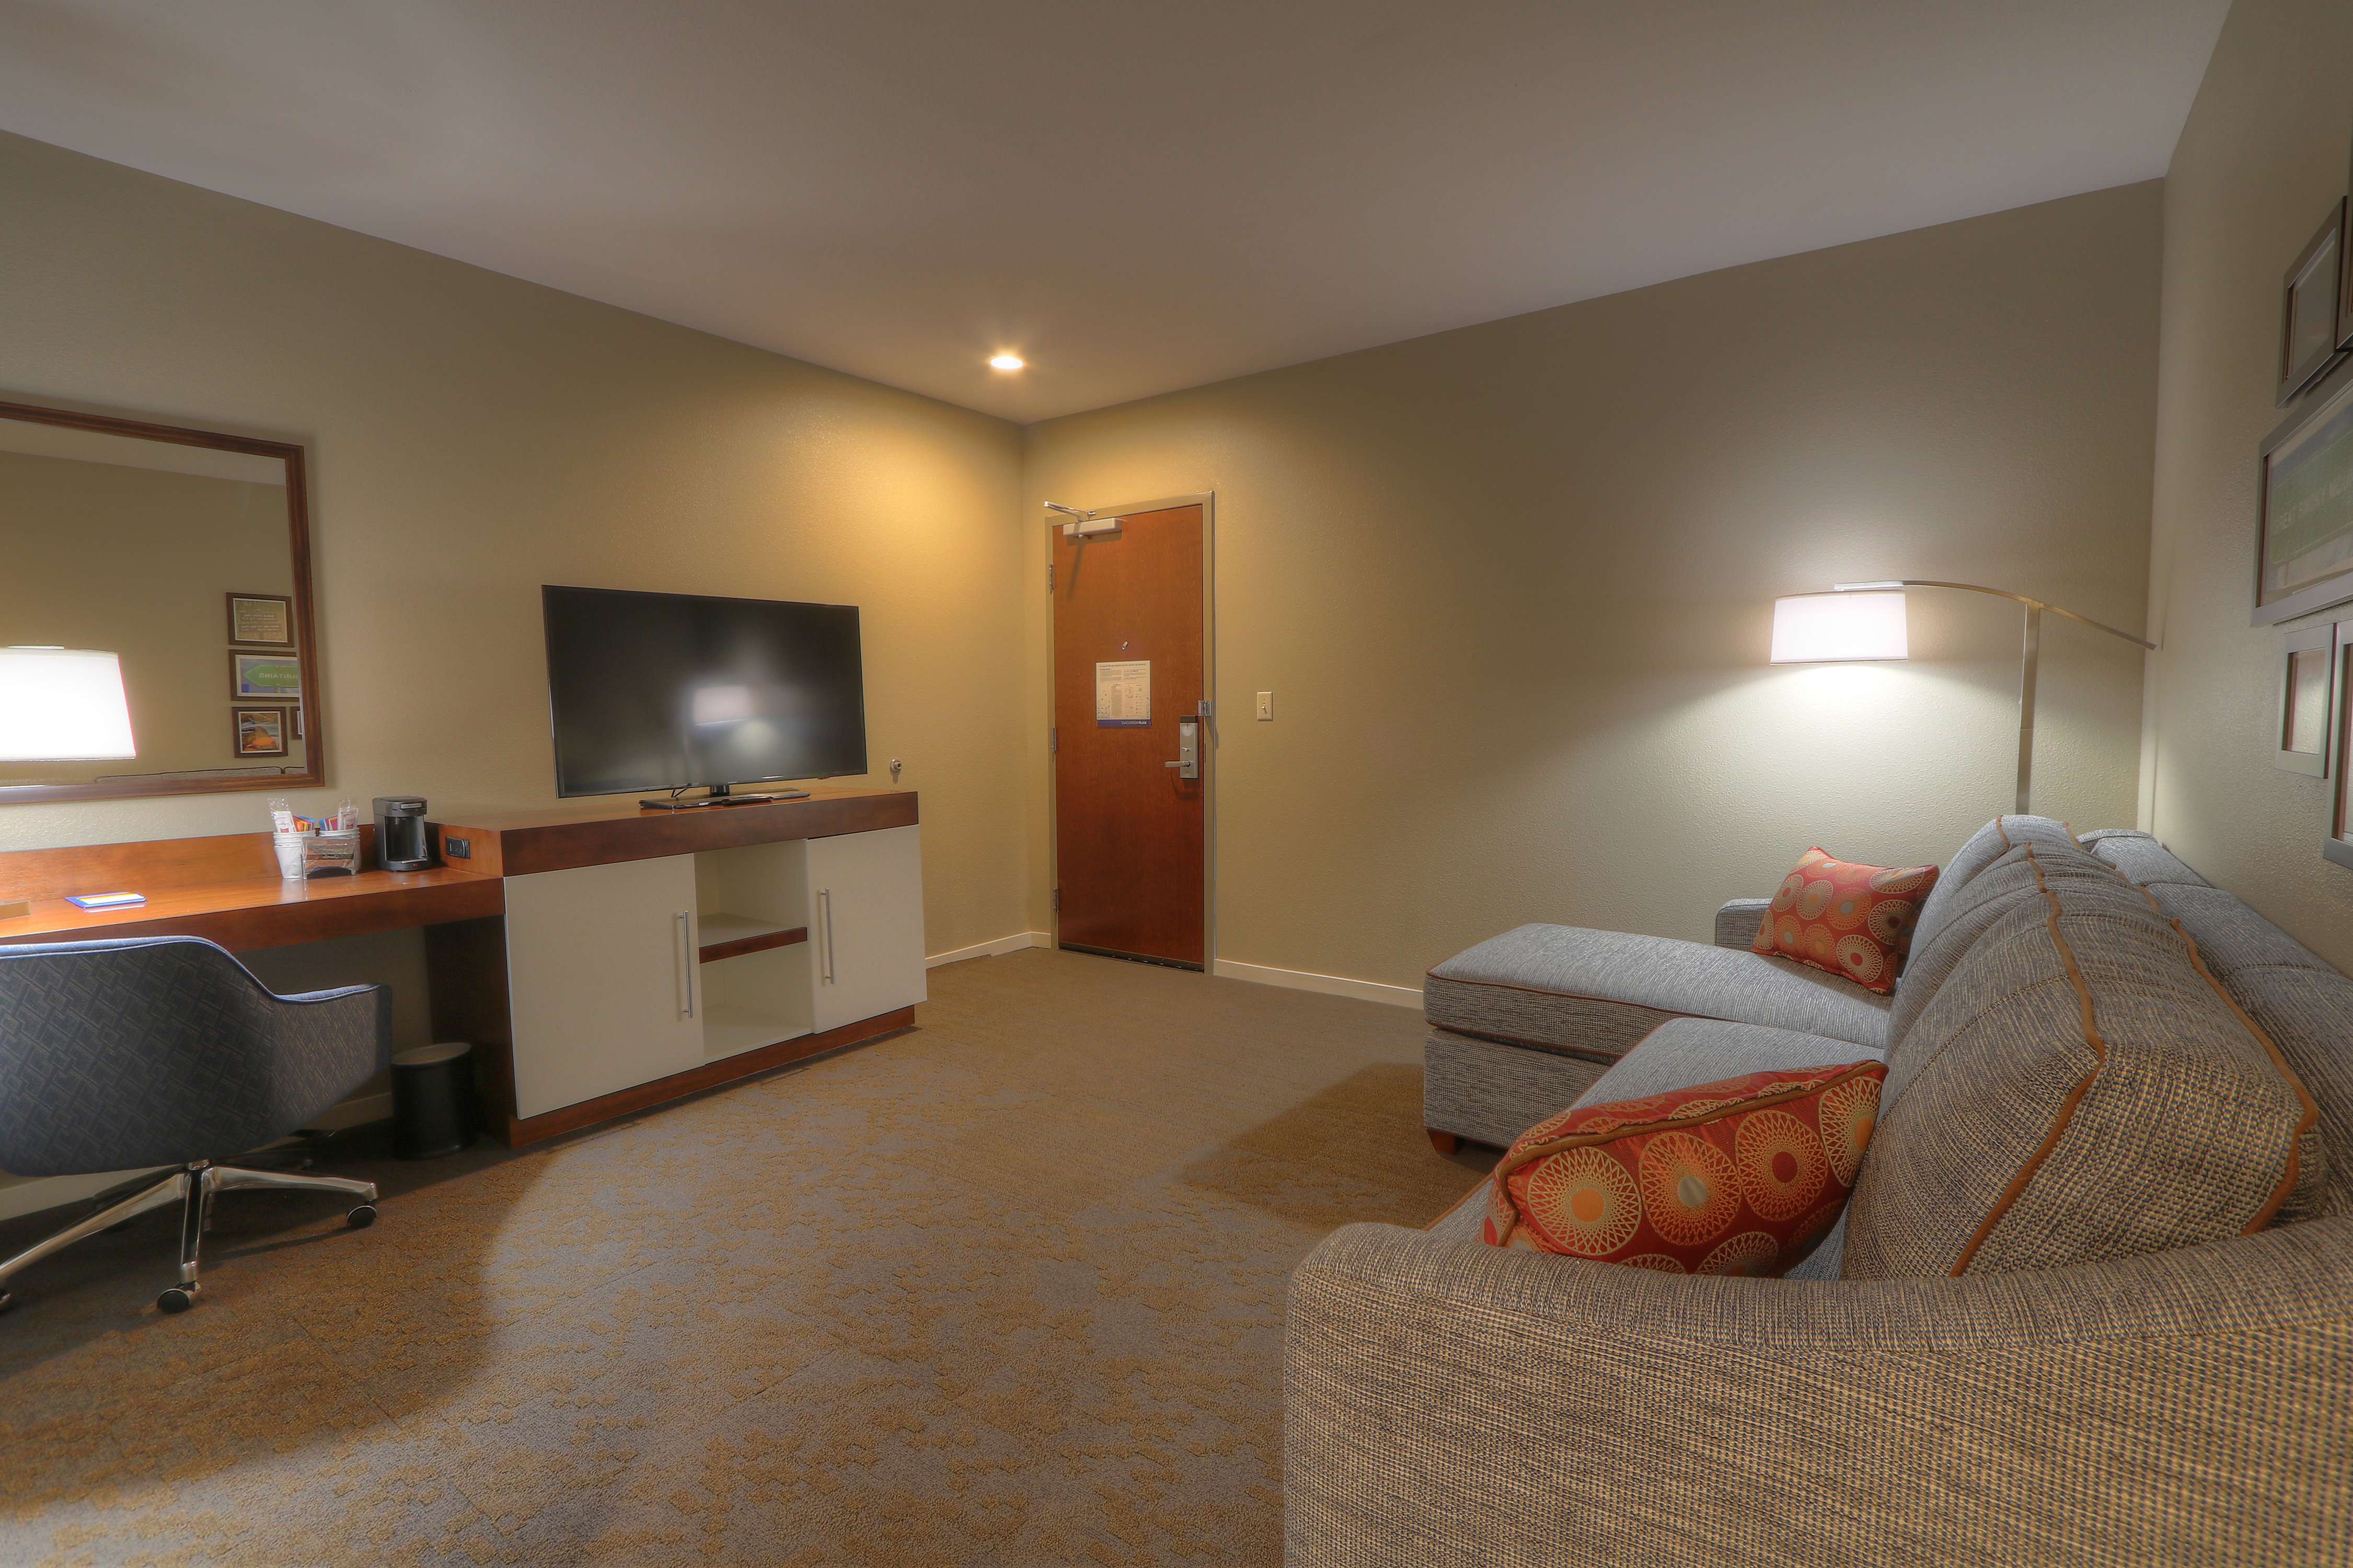 Guest Room Lounge Area with Sofa, Work Desk and HDTV